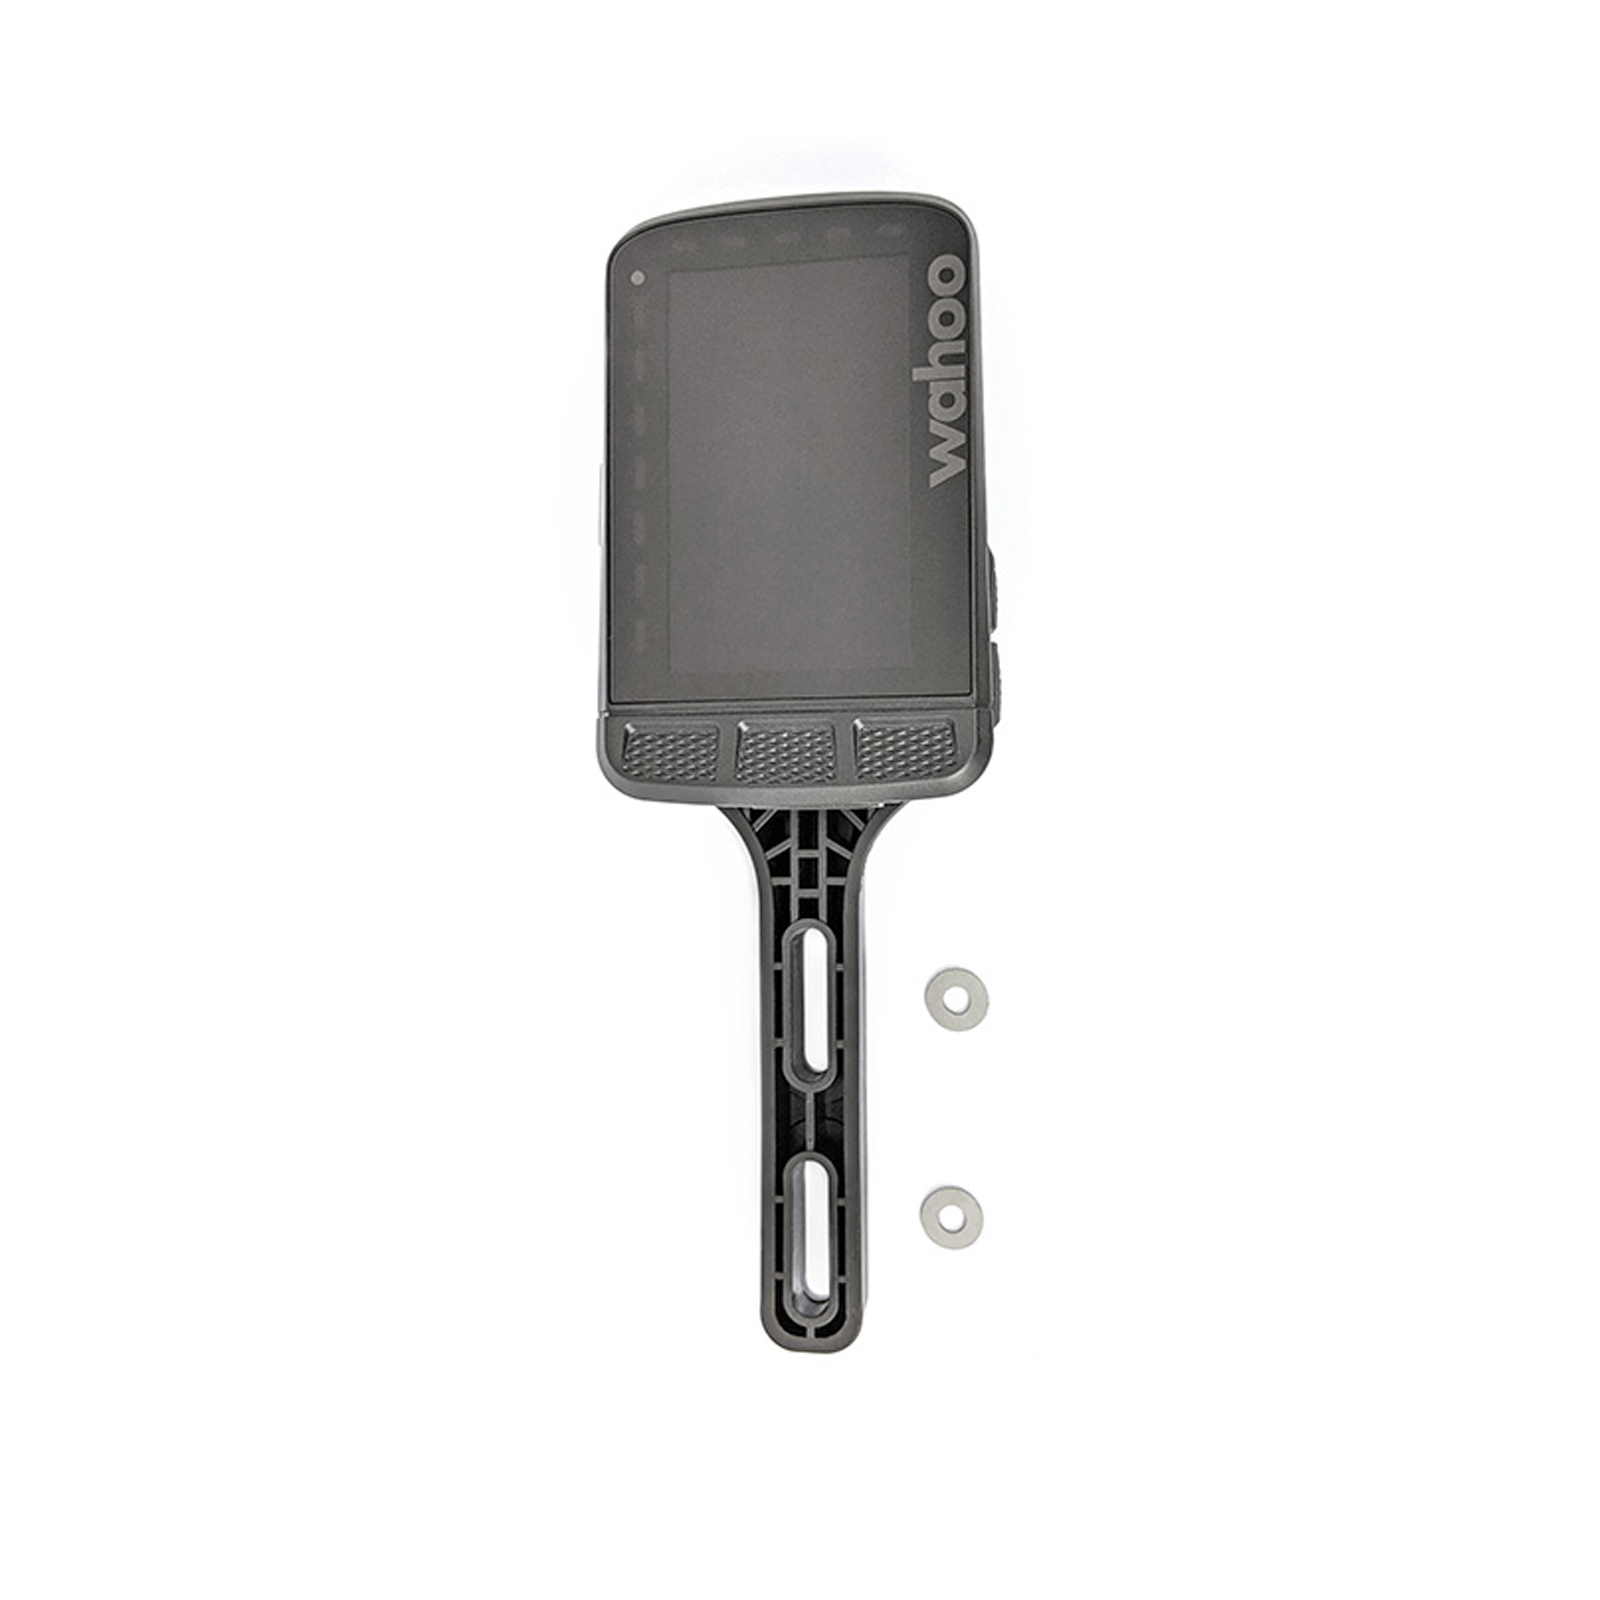 SOPORTE DELANTERO WAHOO ELEMNT ROAM TWO  BOLT OUT FRONT MOUNT MADE FOR TWO UNDERSIDE MOUNTED BOLTS BETWEEN 0.70 INCHES (17.75MM) AND 2.00 INCHES (50.88MM) 